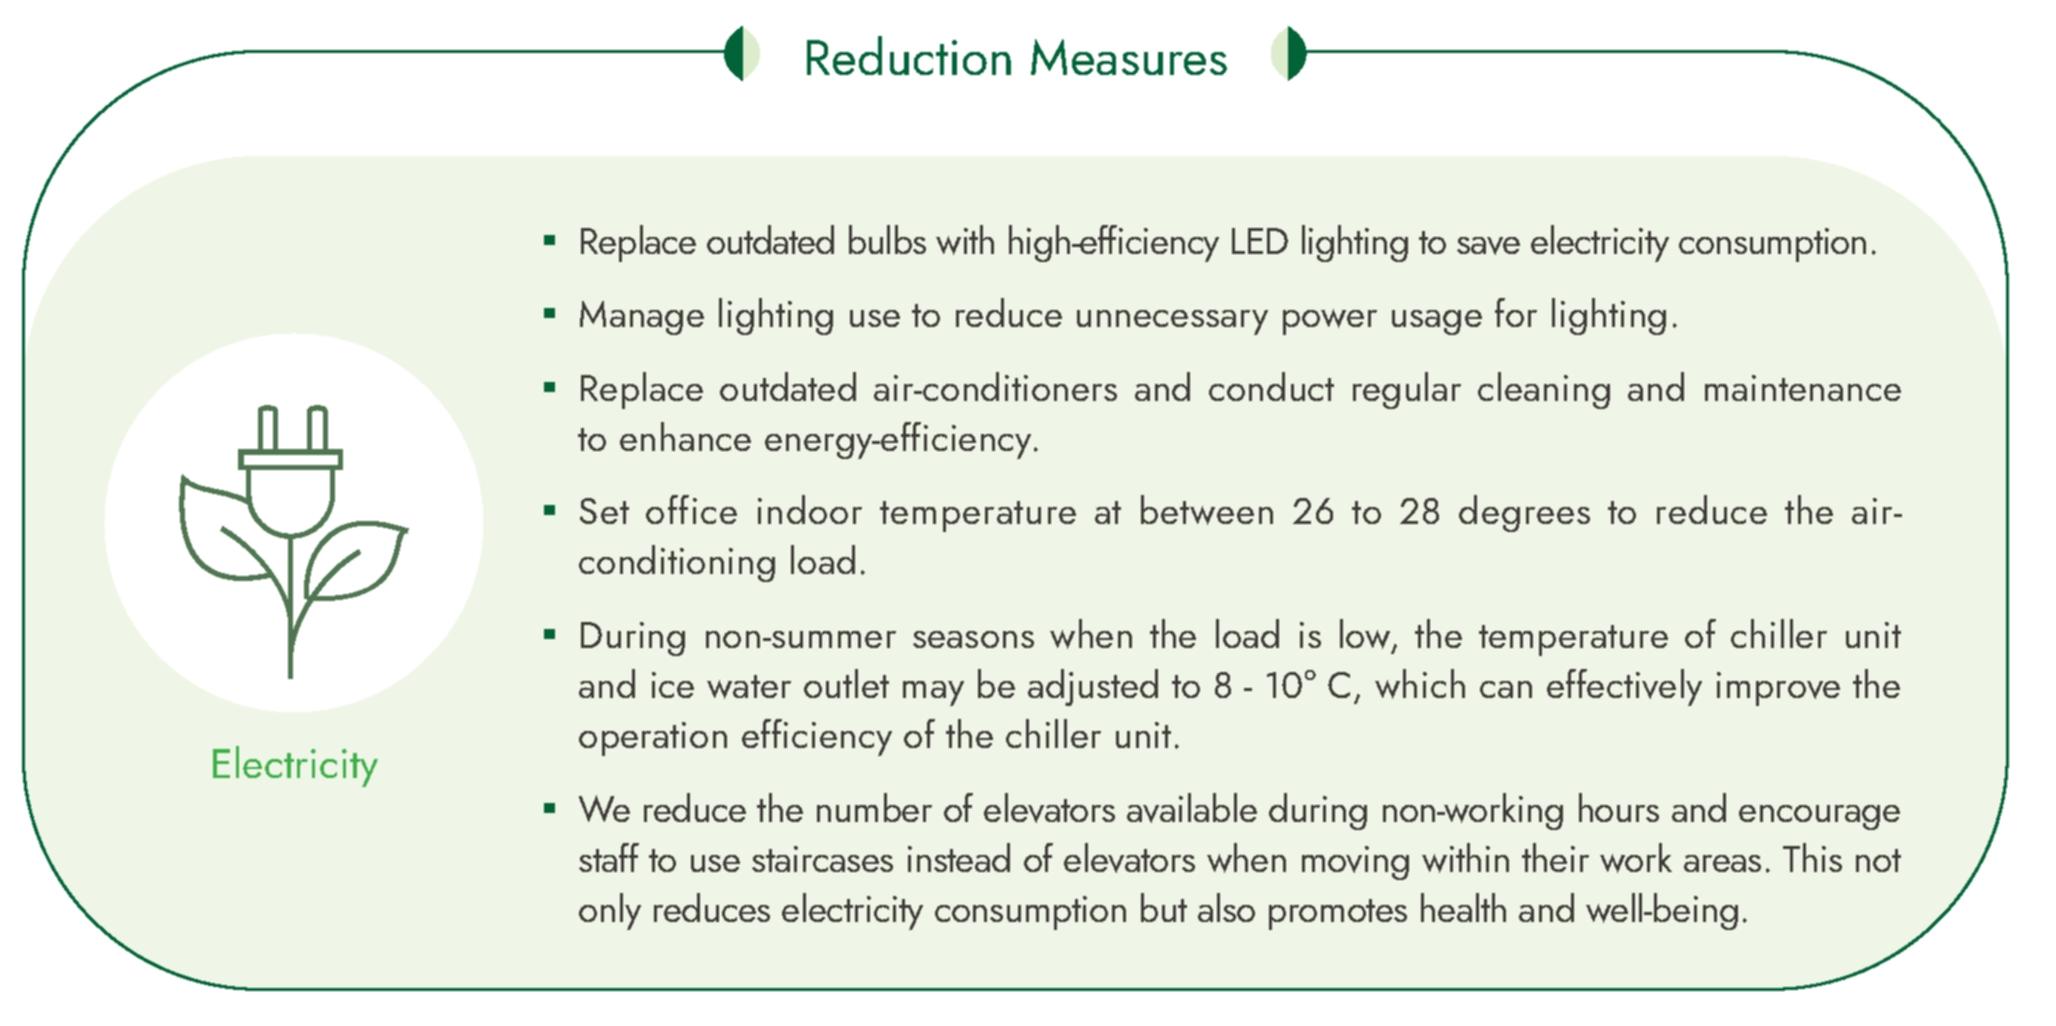 Electricity Reduction Measures